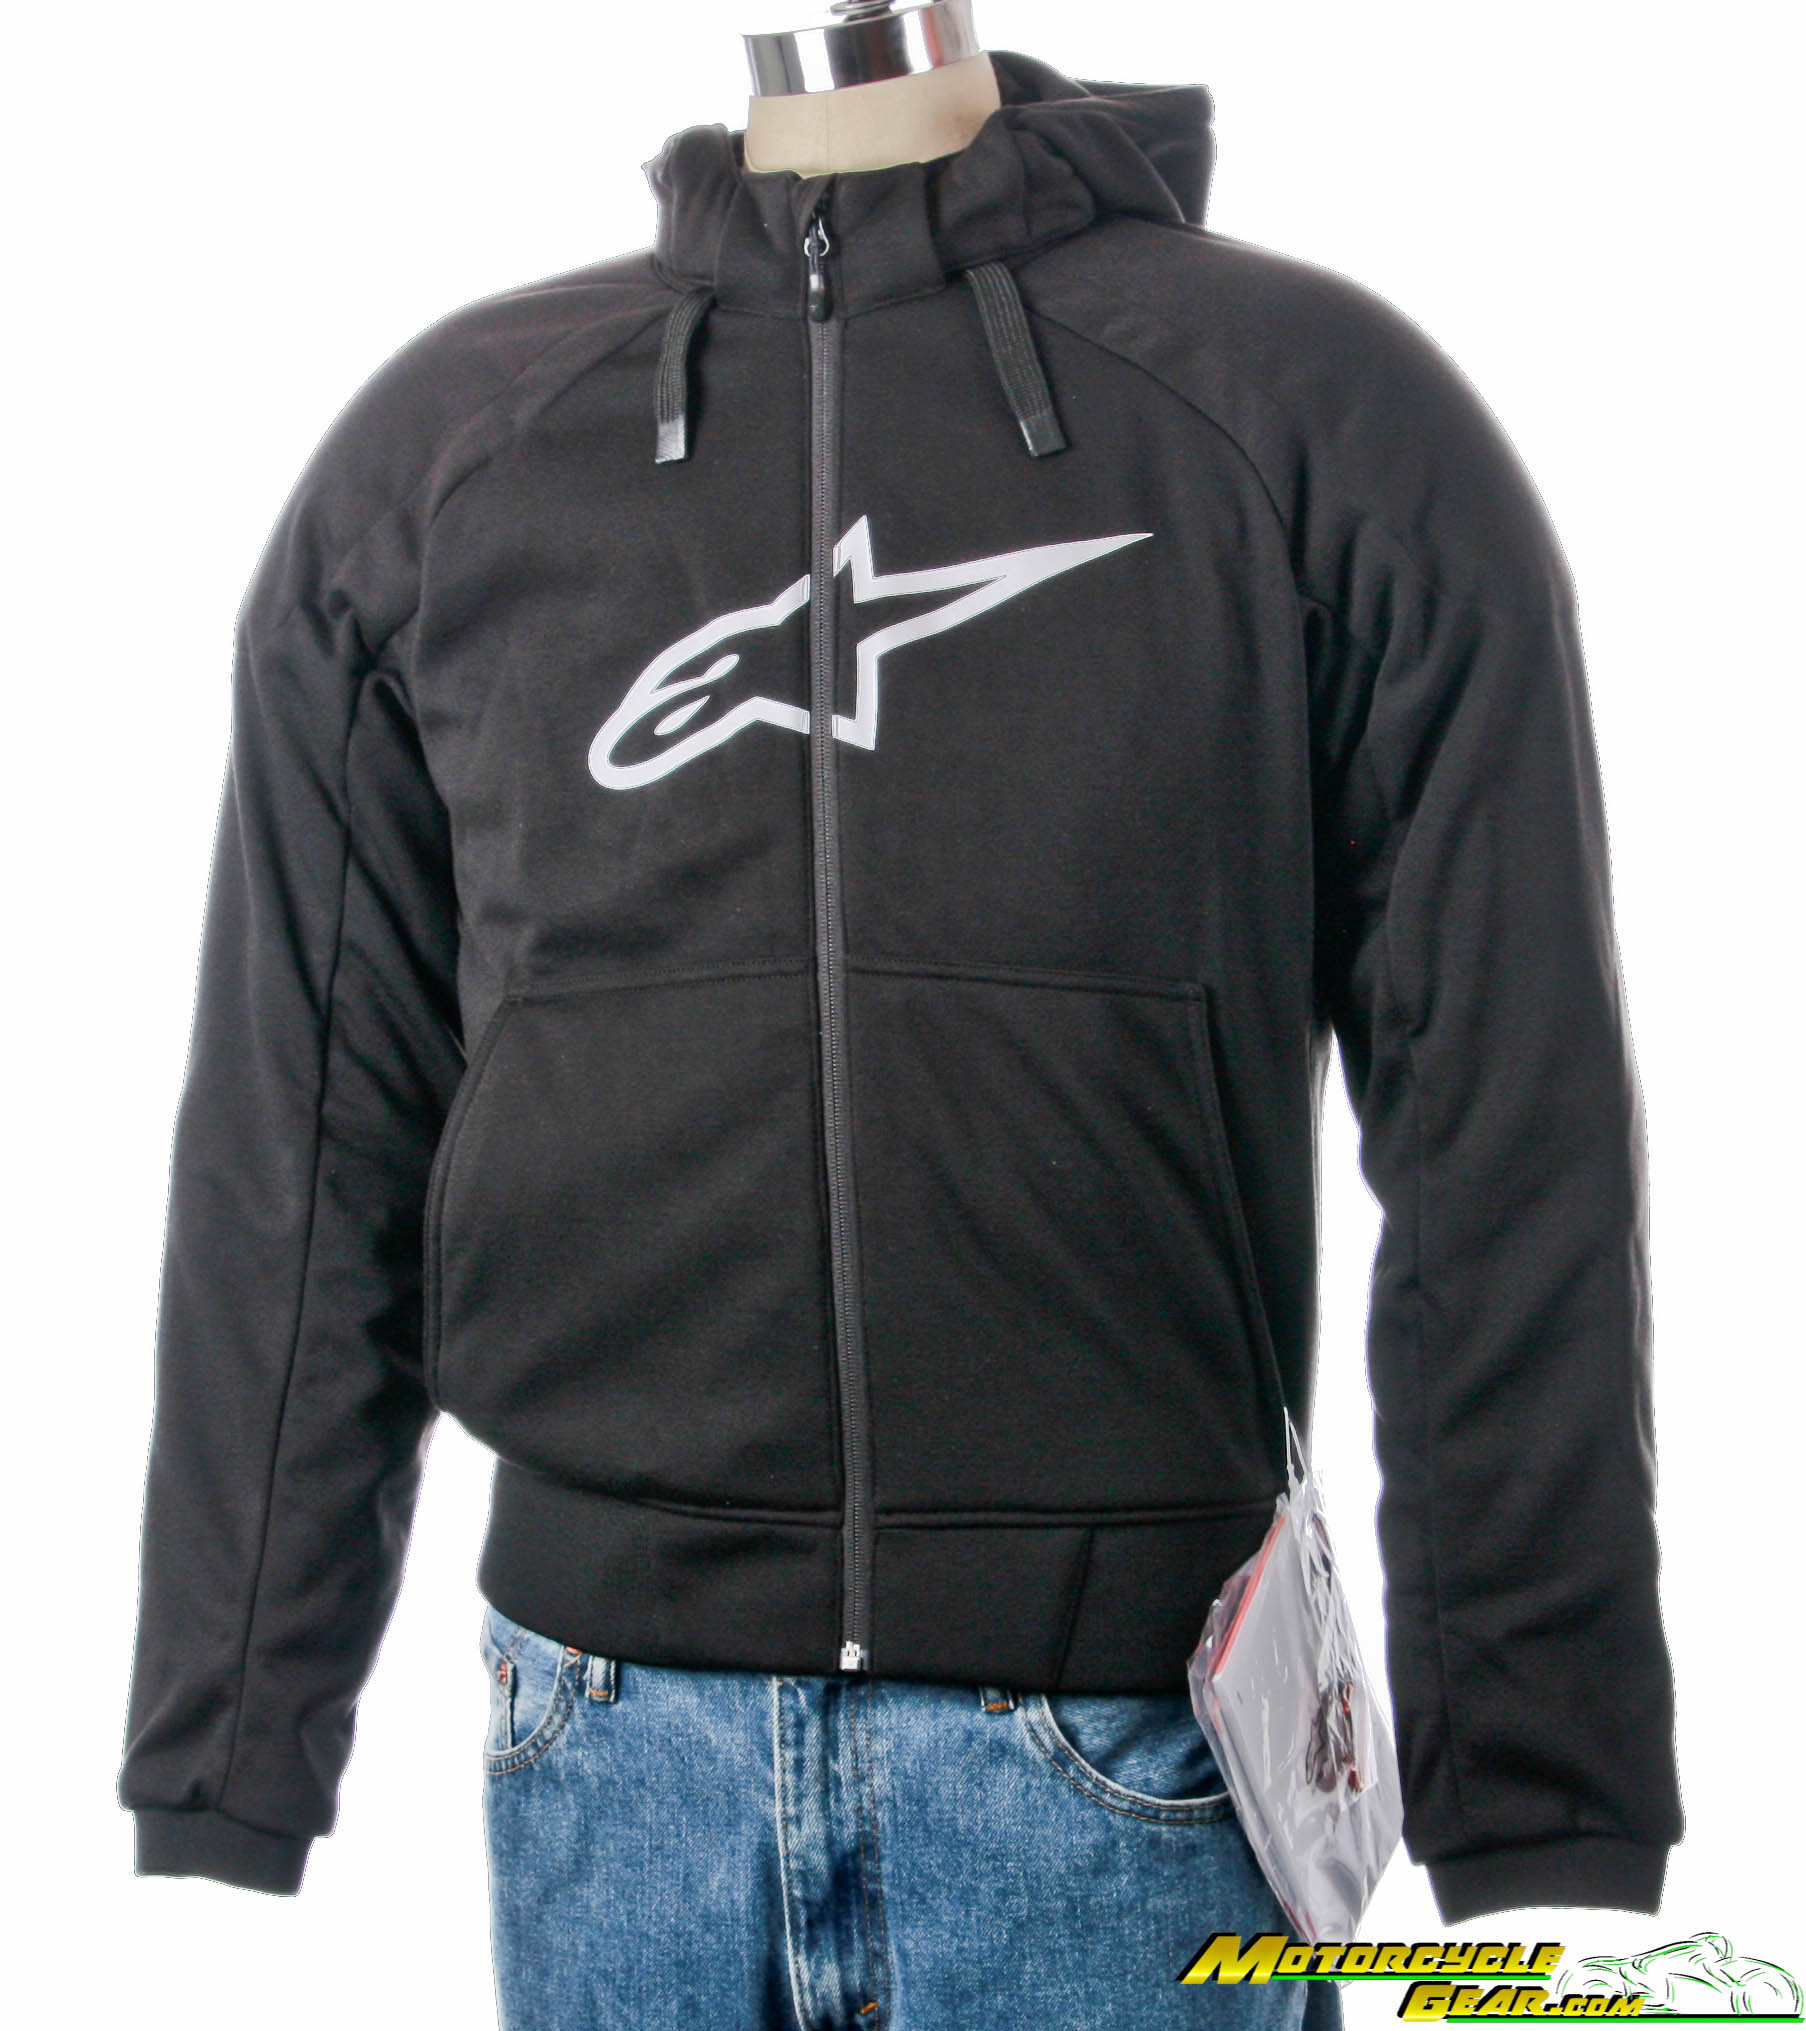 Viewing Images For Alpinestars Chrome Sport Hoodie :: MotorcycleGear.com